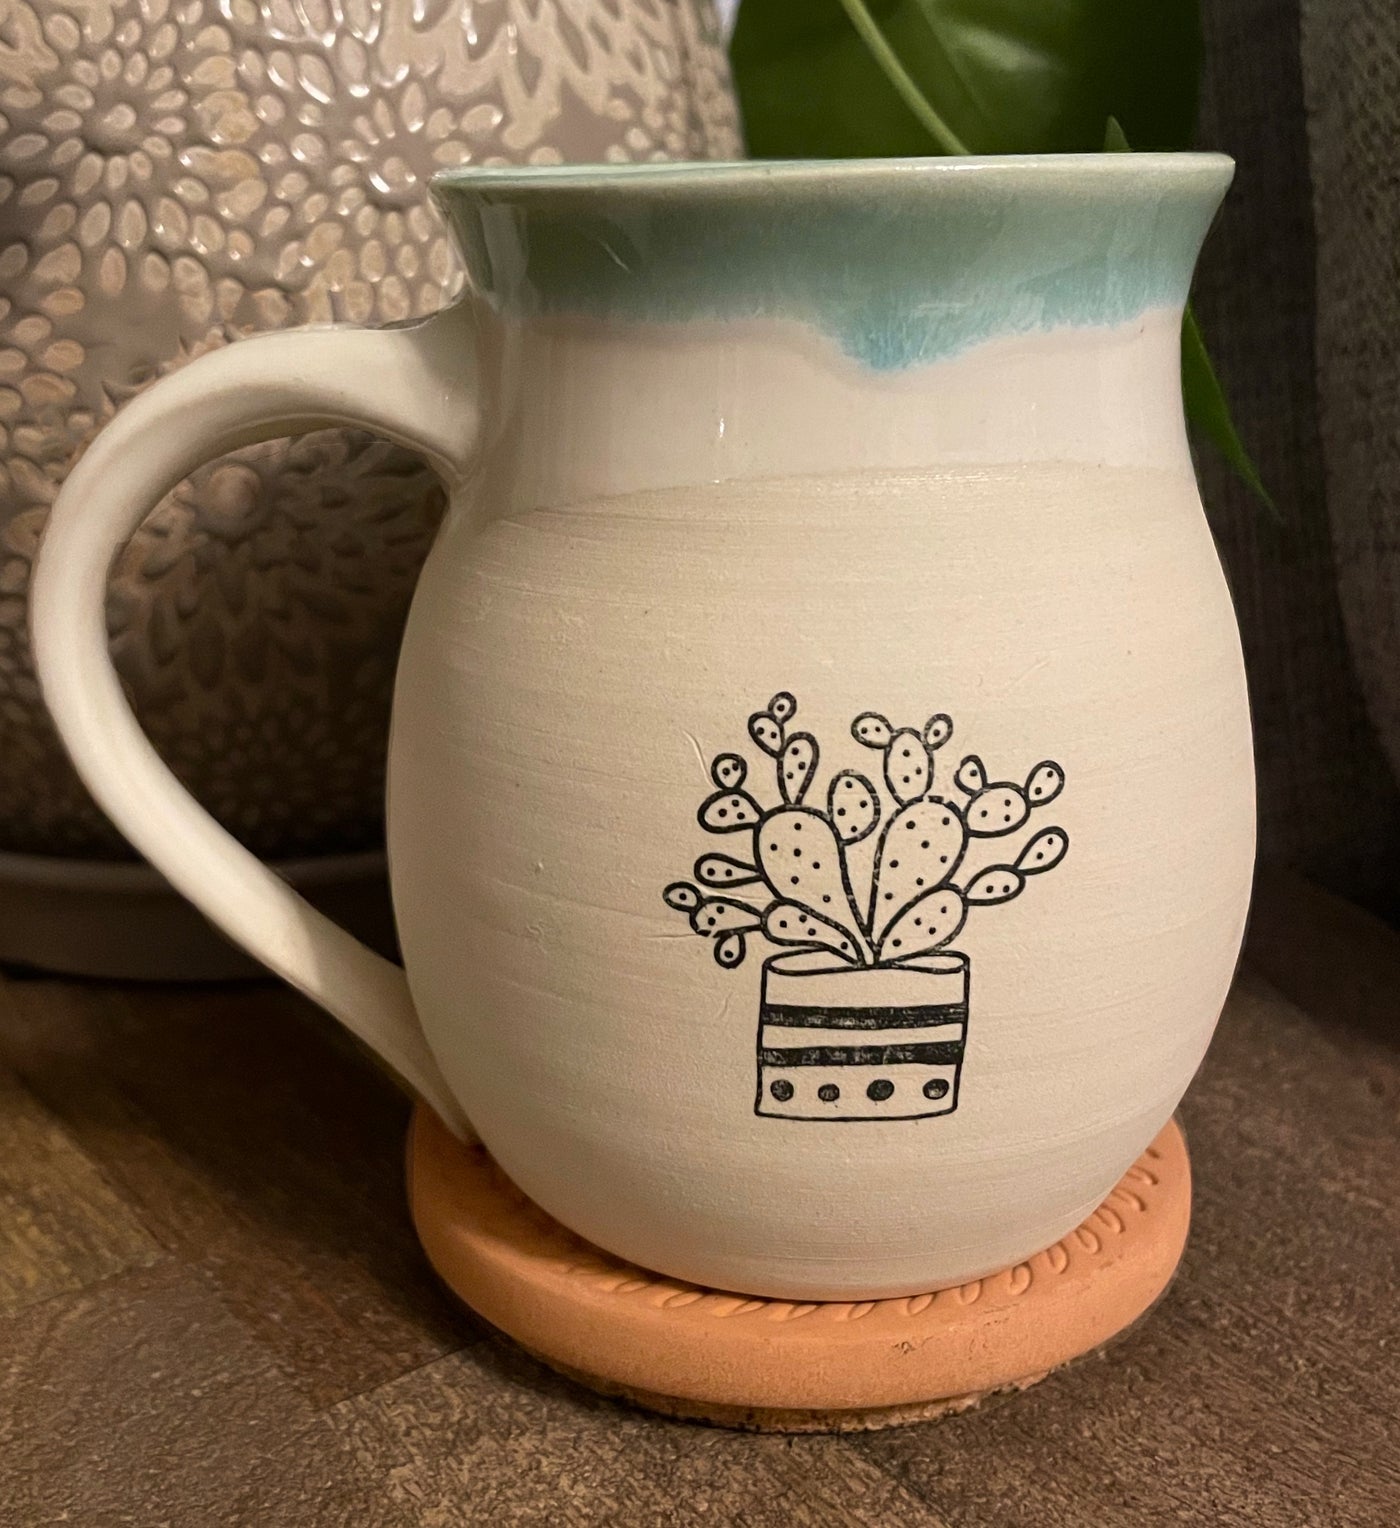 G4 These small batch, handmade mugs are available in blue or green. Each mug is stamped with a unique plant design. Explore the best and coolest gift ideas for plant enthusiasts!